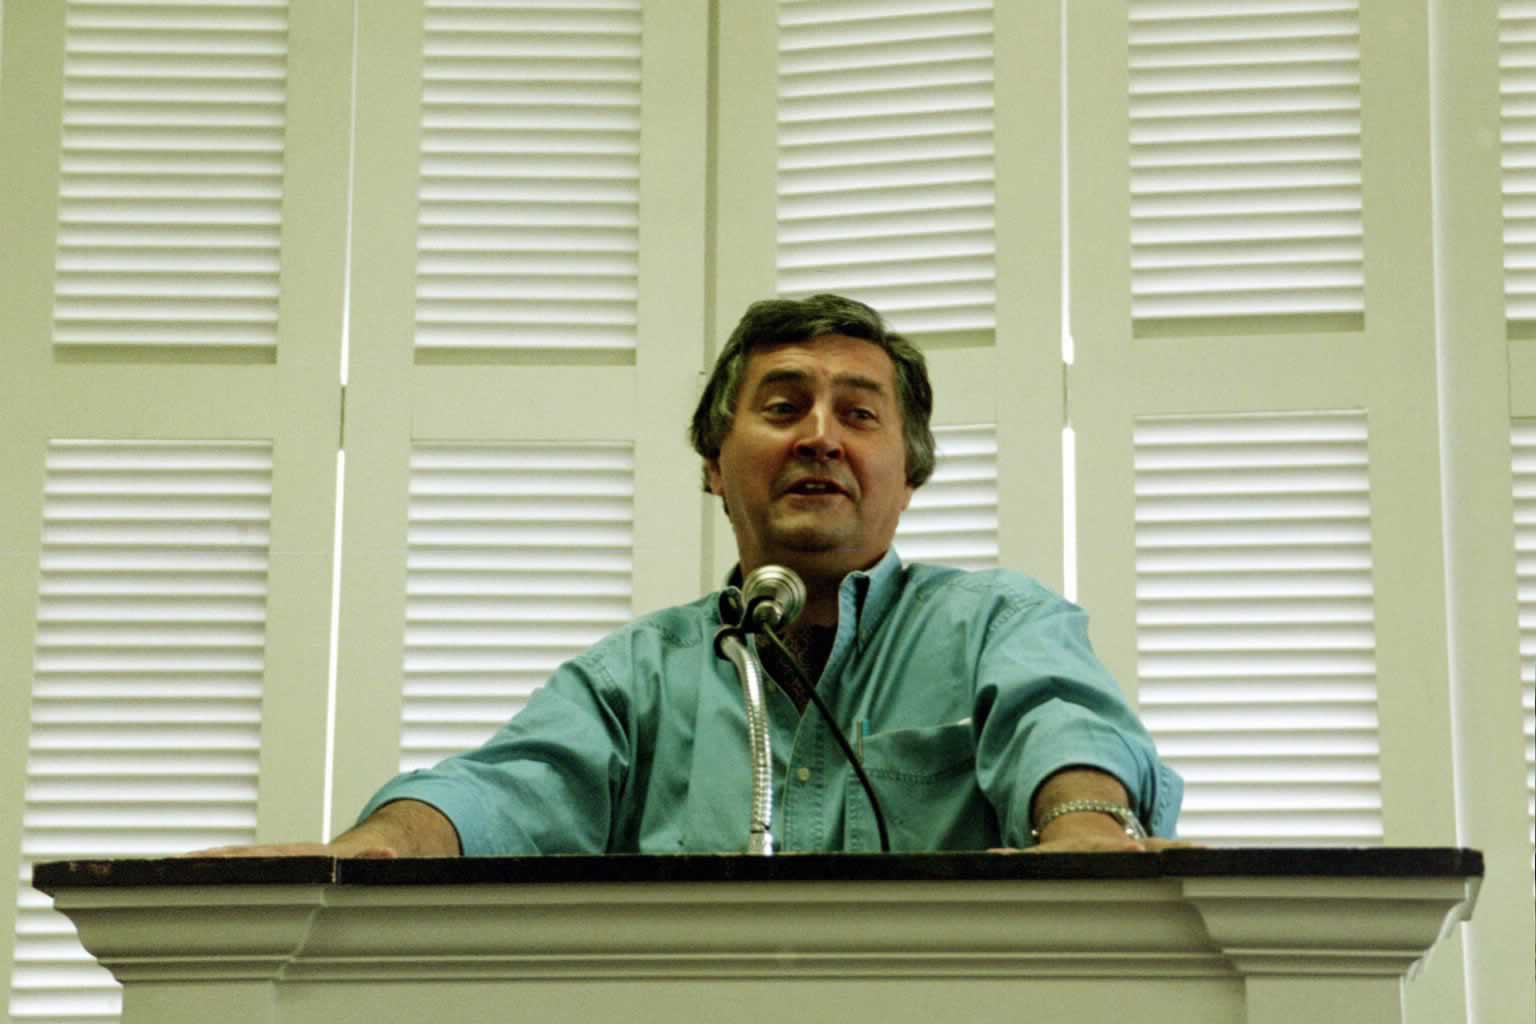 picture of Paul Marshall standing in front of a podium speaking wearing a green shirt